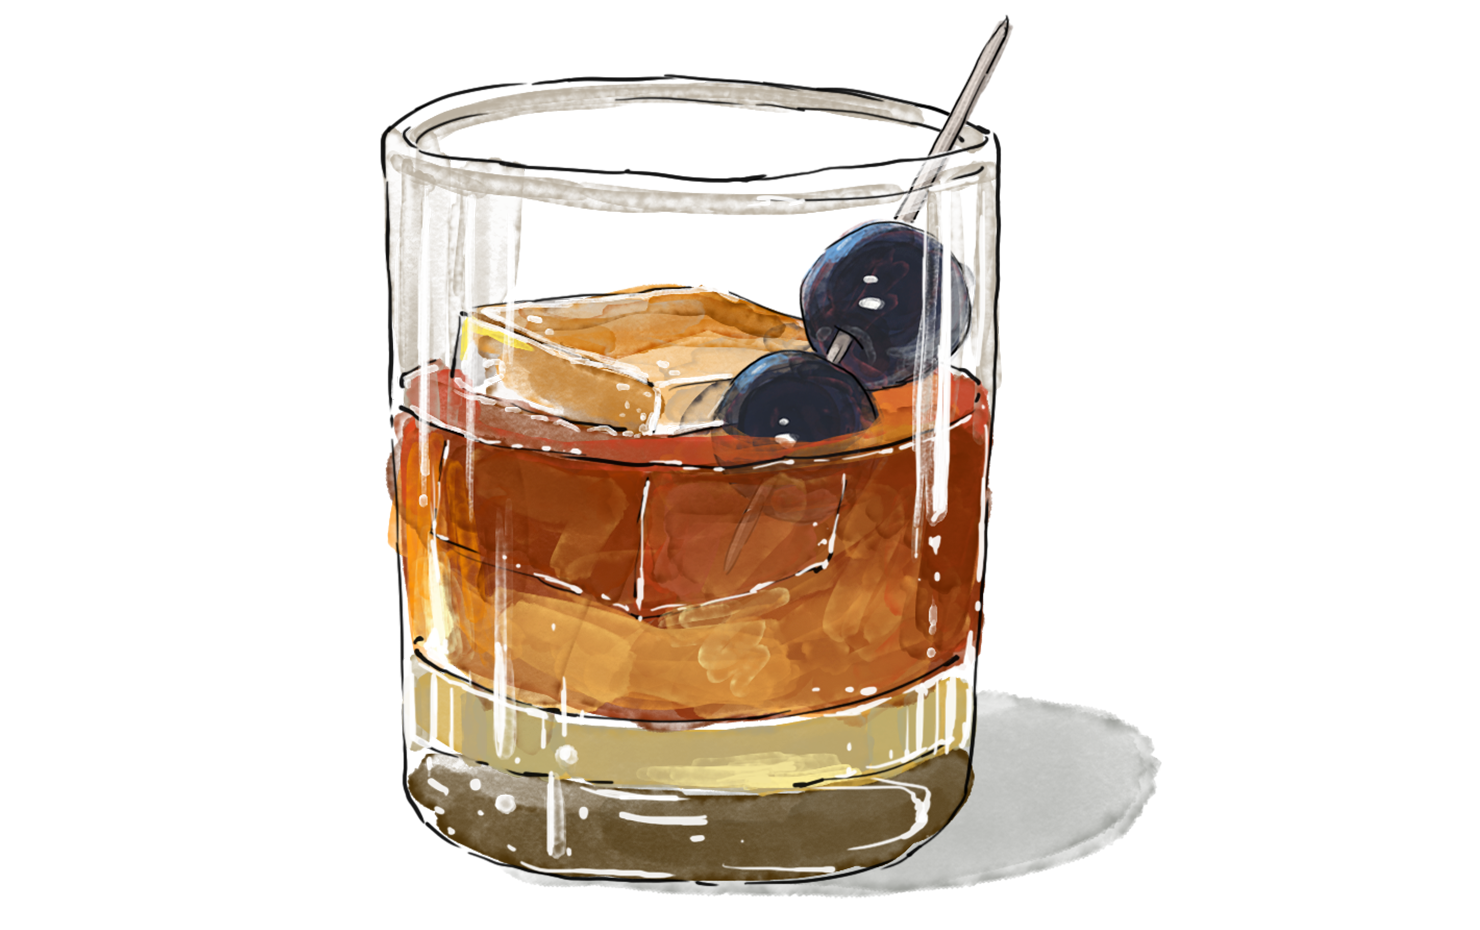 Illustration of a glass of Maple Bourbon in an Old Fashioned style glass